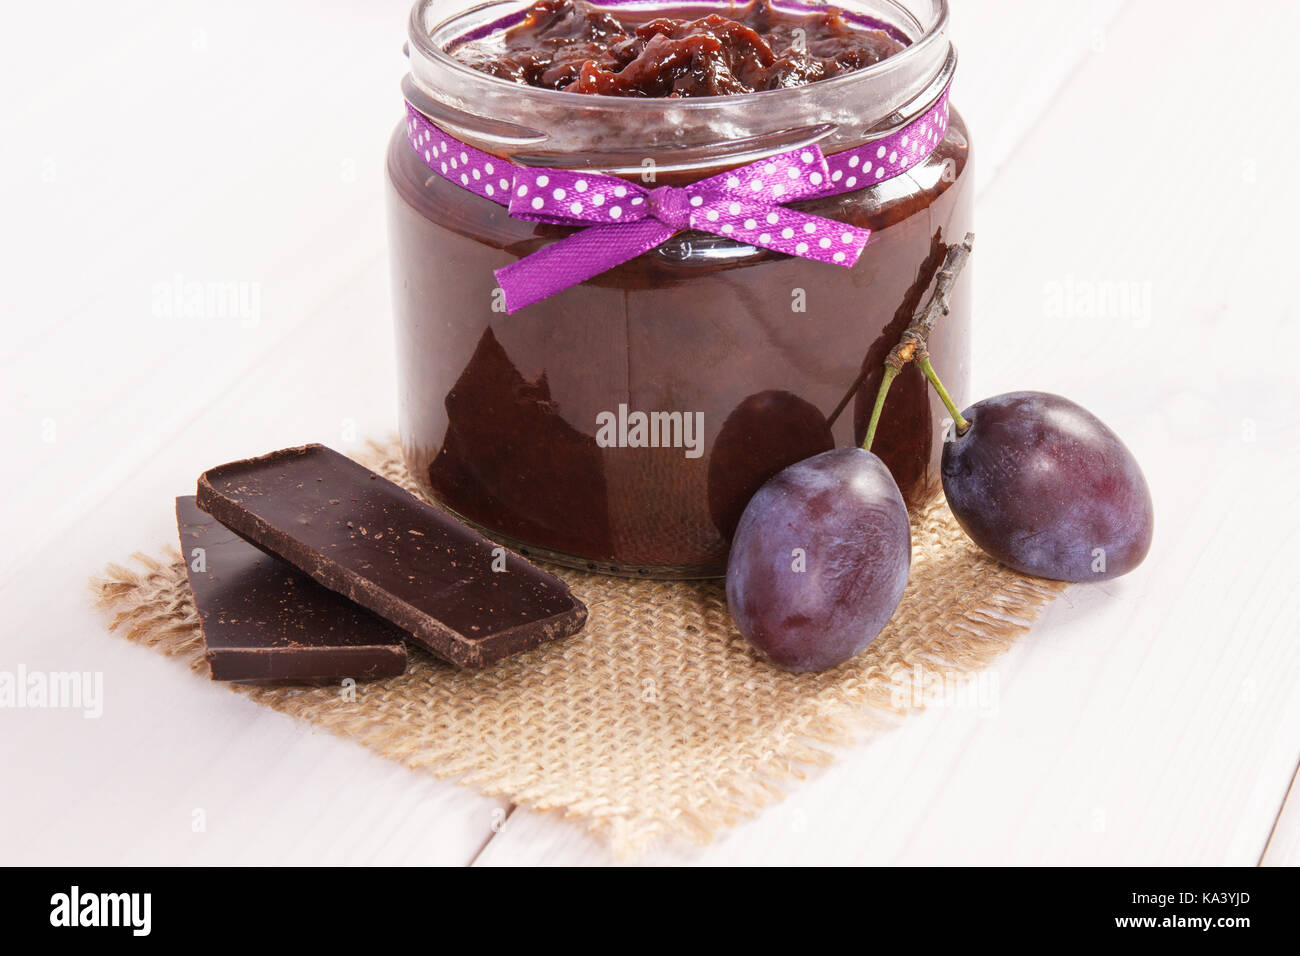 Fresh plum jam or marmalade in glass jar, ripe fruits and chocolate, concept of healthy sweet dessert Stock Photo